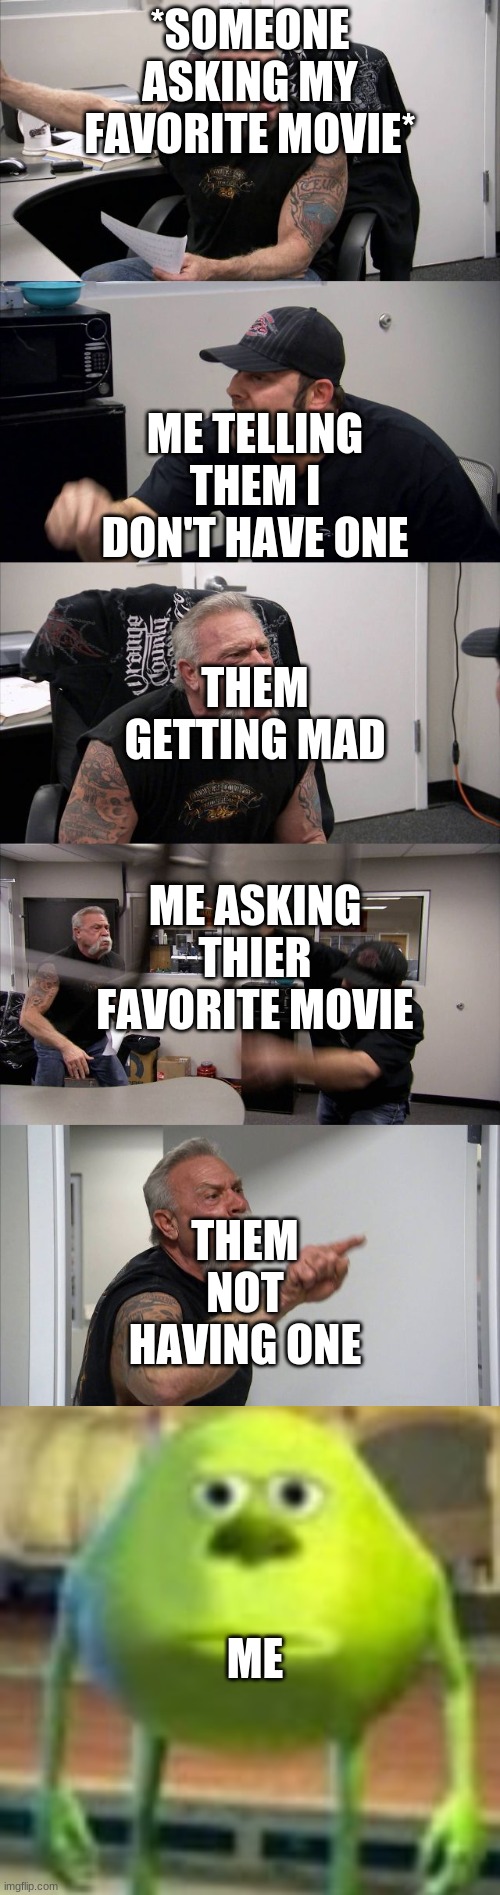 *SOMEONE ASKING MY FAVORITE MOVIE*; ME TELLING THEM I DON'T HAVE ONE; THEM GETTING MAD; ME ASKING THIER FAVORITE MOVIE; THEM NOT HAVING ONE; ME | image tagged in memes,american chopper argument | made w/ Imgflip meme maker